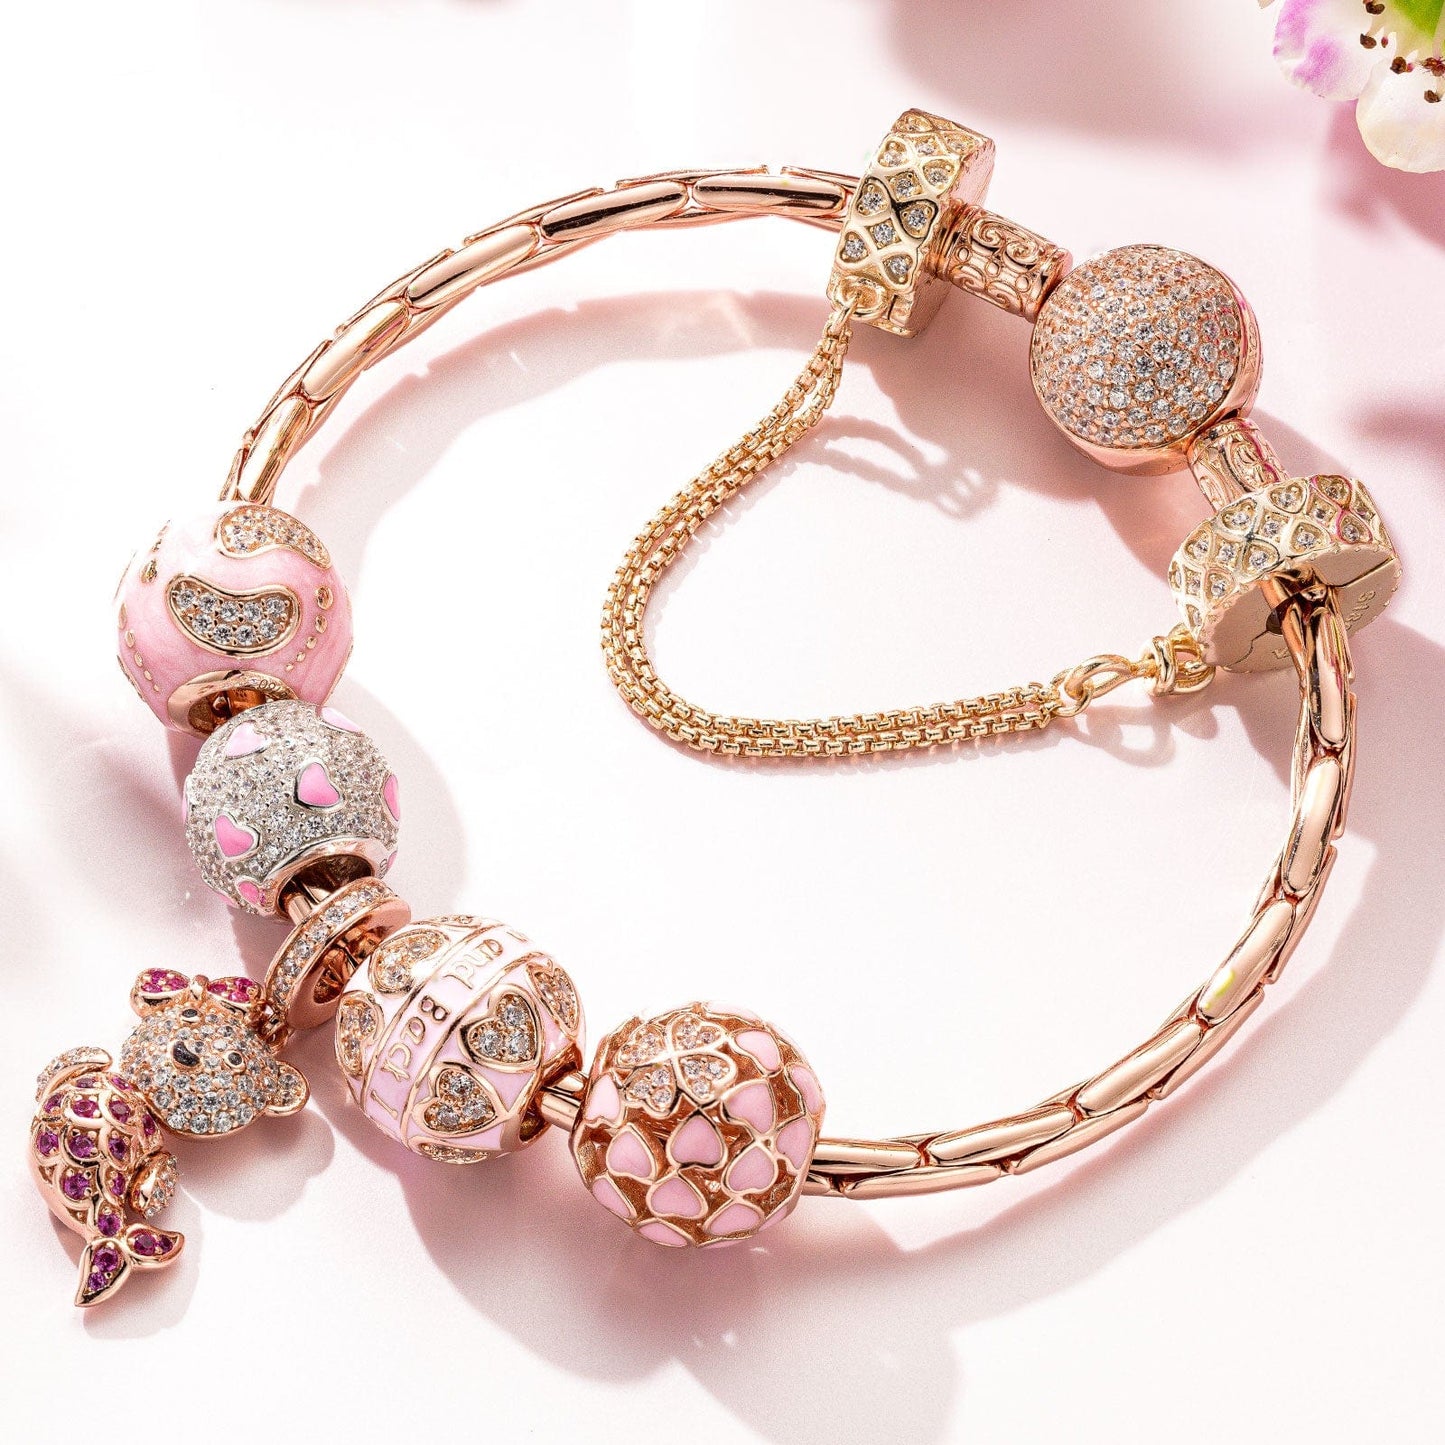 Sterling Silver Fantasy Island Charms Bracelet Set With Enamel In Rose Gold Plated